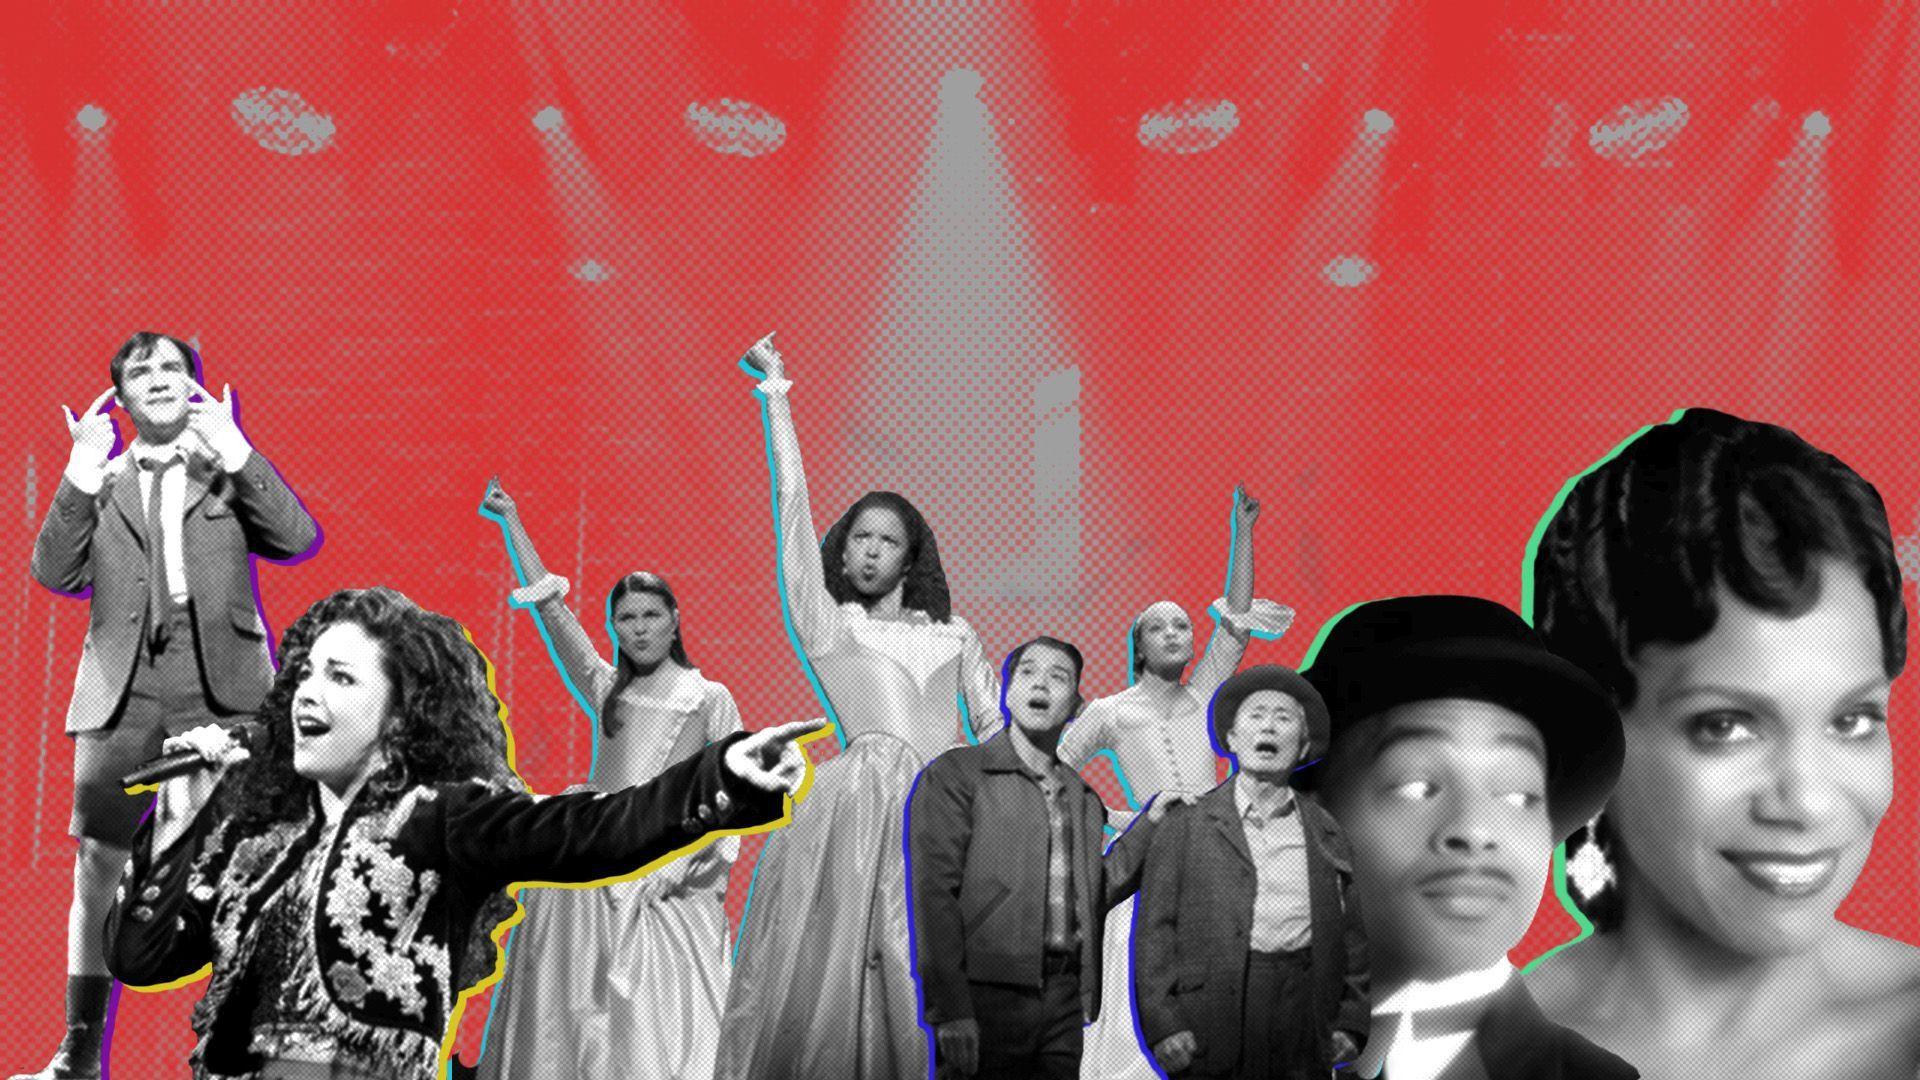 BroadwaySoDiverse: Theater is leading the industry in representation